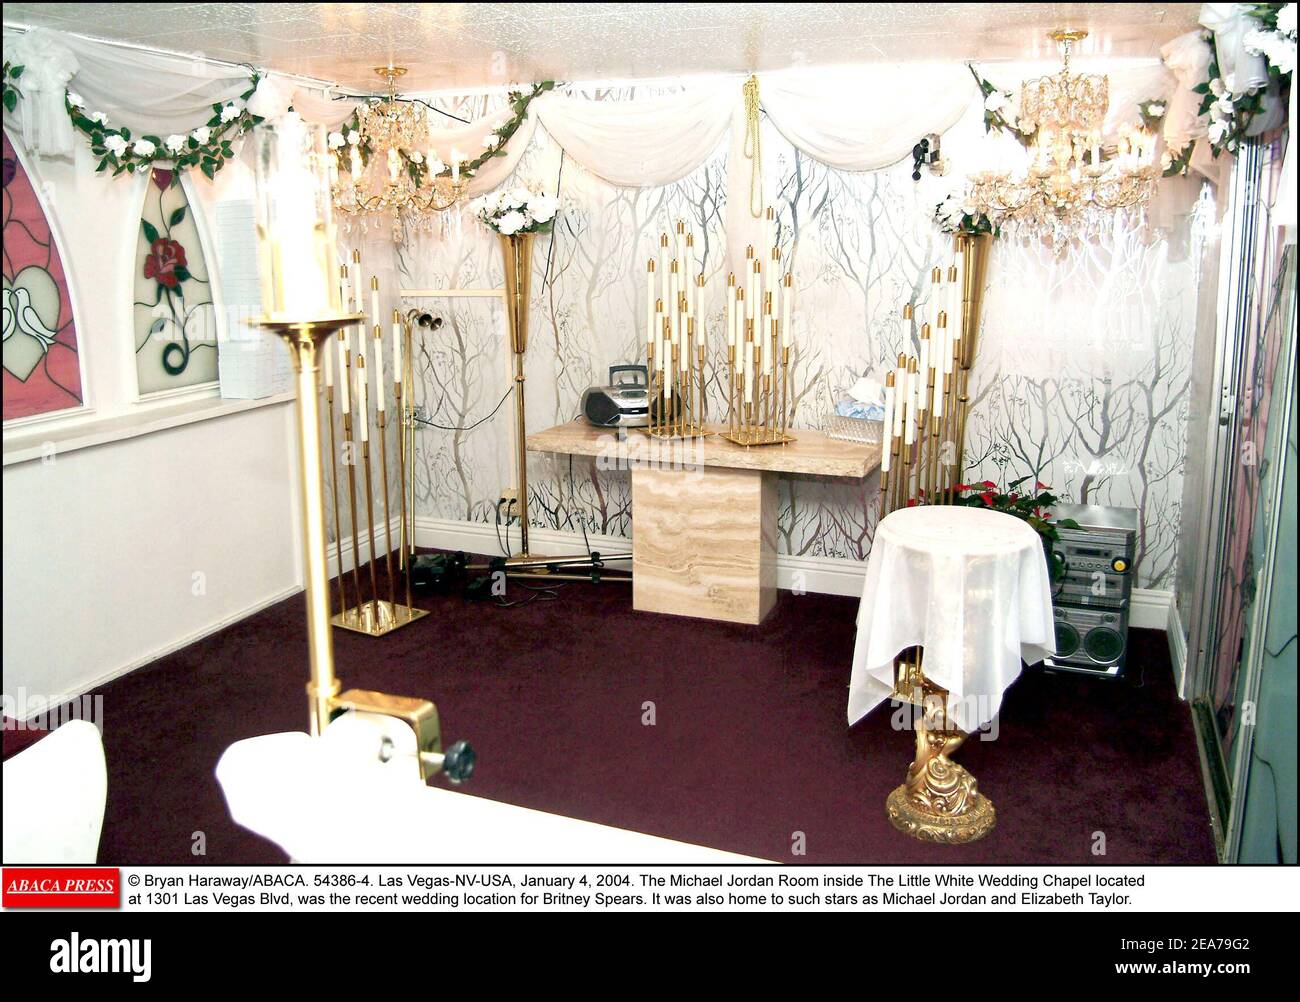 © Bryan Haraway/ABACA. 54386-4. Las Vegas-NV-USA, January 4, 2004. The Michael Jordan Room inside The Little White Wedding Chapel located at 1301 Las Vegas Blvd, was the recent wedding location for Britney Spears. It was also home to such stars as Michael Jordan and Elizabeth Taylor. Stock Photo